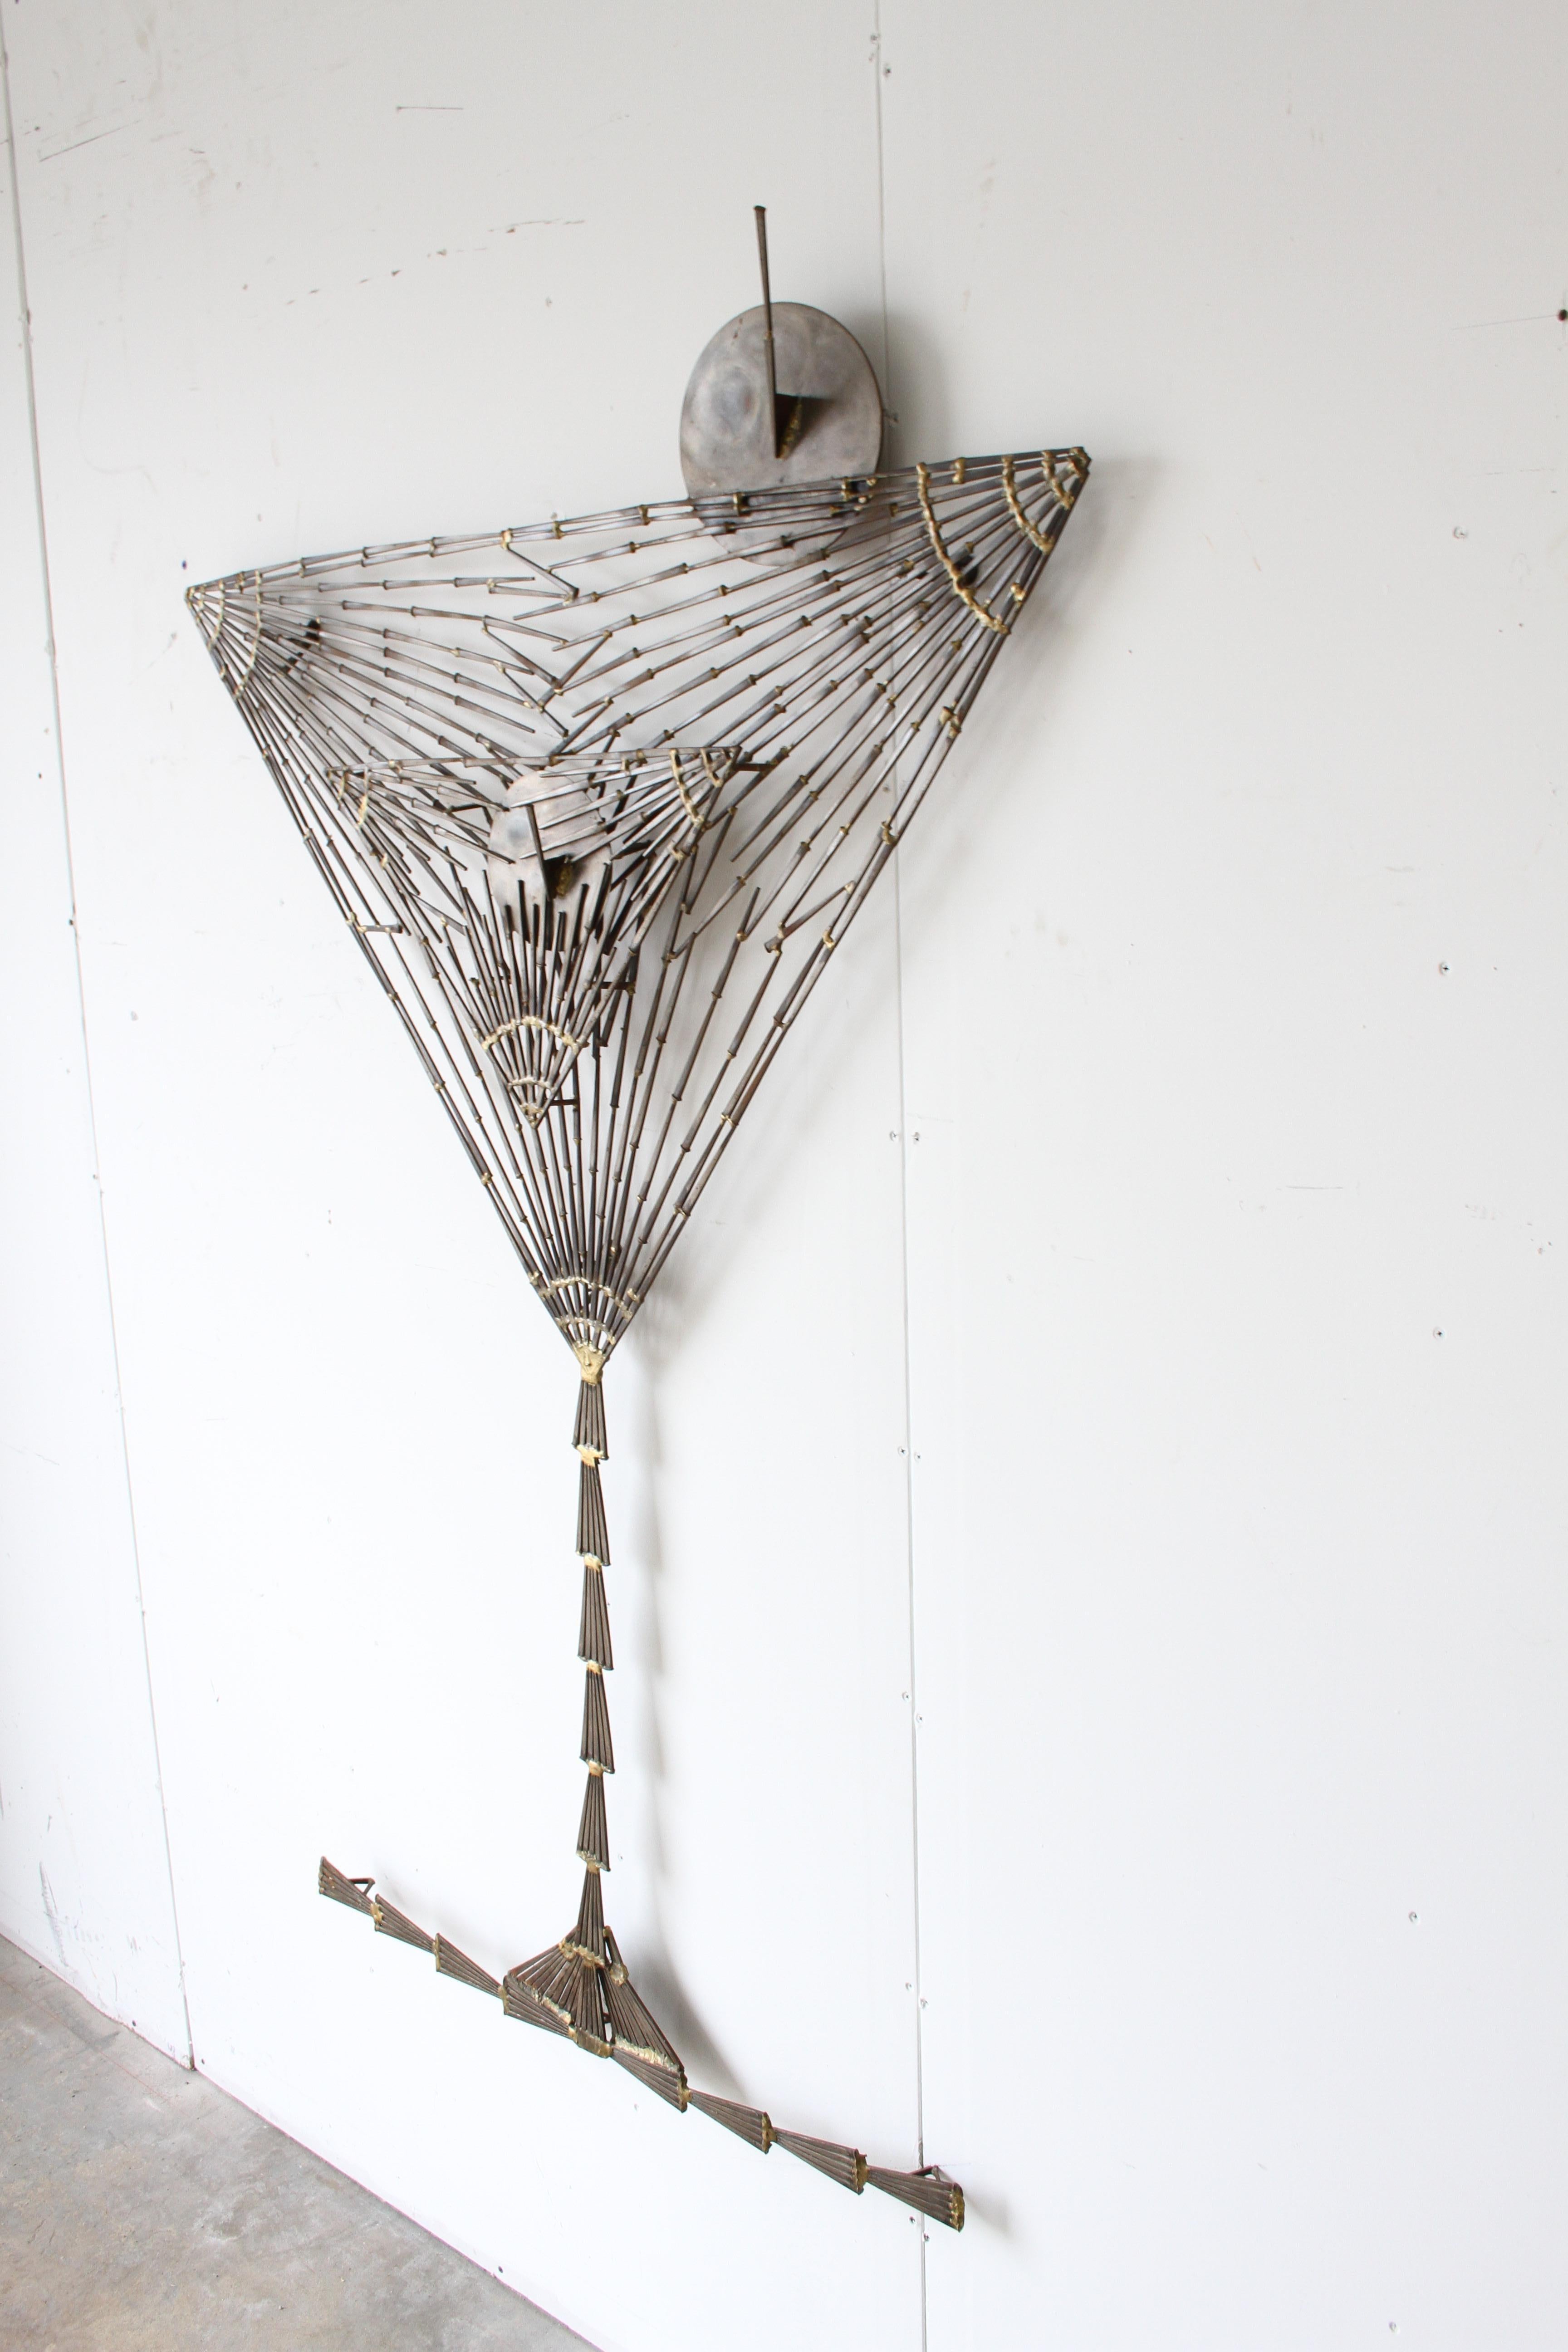 Very unique wall sculpture of a large martini glass with olives and ice made of nails in the Brutalist style by St. Louis artist Marc Weinstein, possibly a commission for a bar. Overall very nice condition, light patina, no breaks or loss. Marc